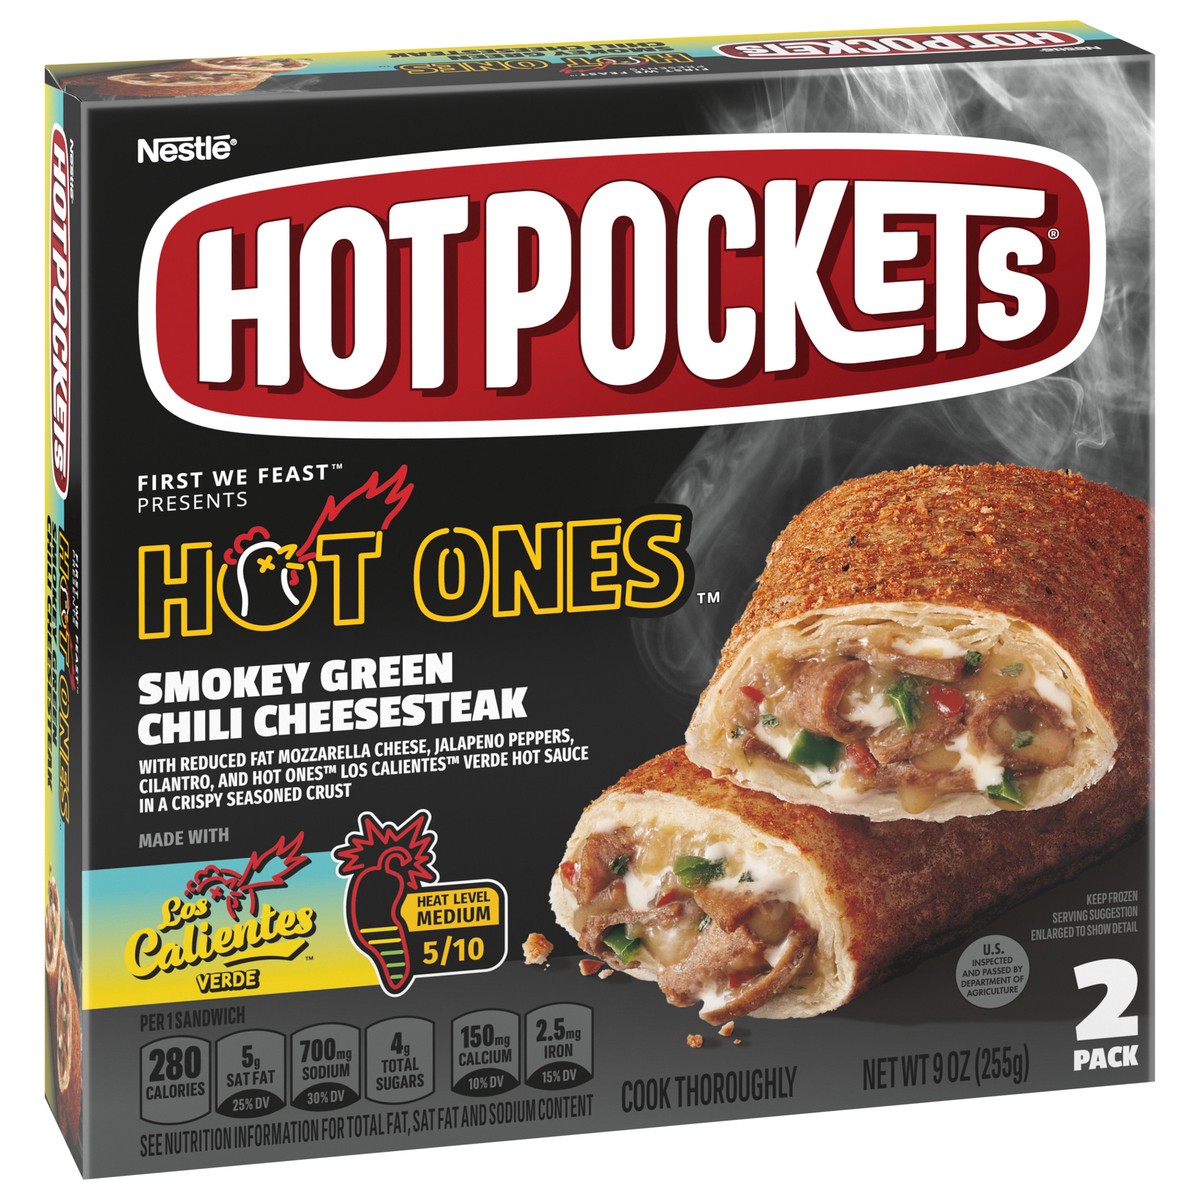 slide 2 of 9, Hot Pockets Hot Ones Smokey Green Chili Cheesesteak Frozen Snacks in a Crispy Buttery Crust, Steak and Cheese Sandwiches Made with Real Cheddar Cheese, 2 Count Frozen Sandwiches, 9 oz